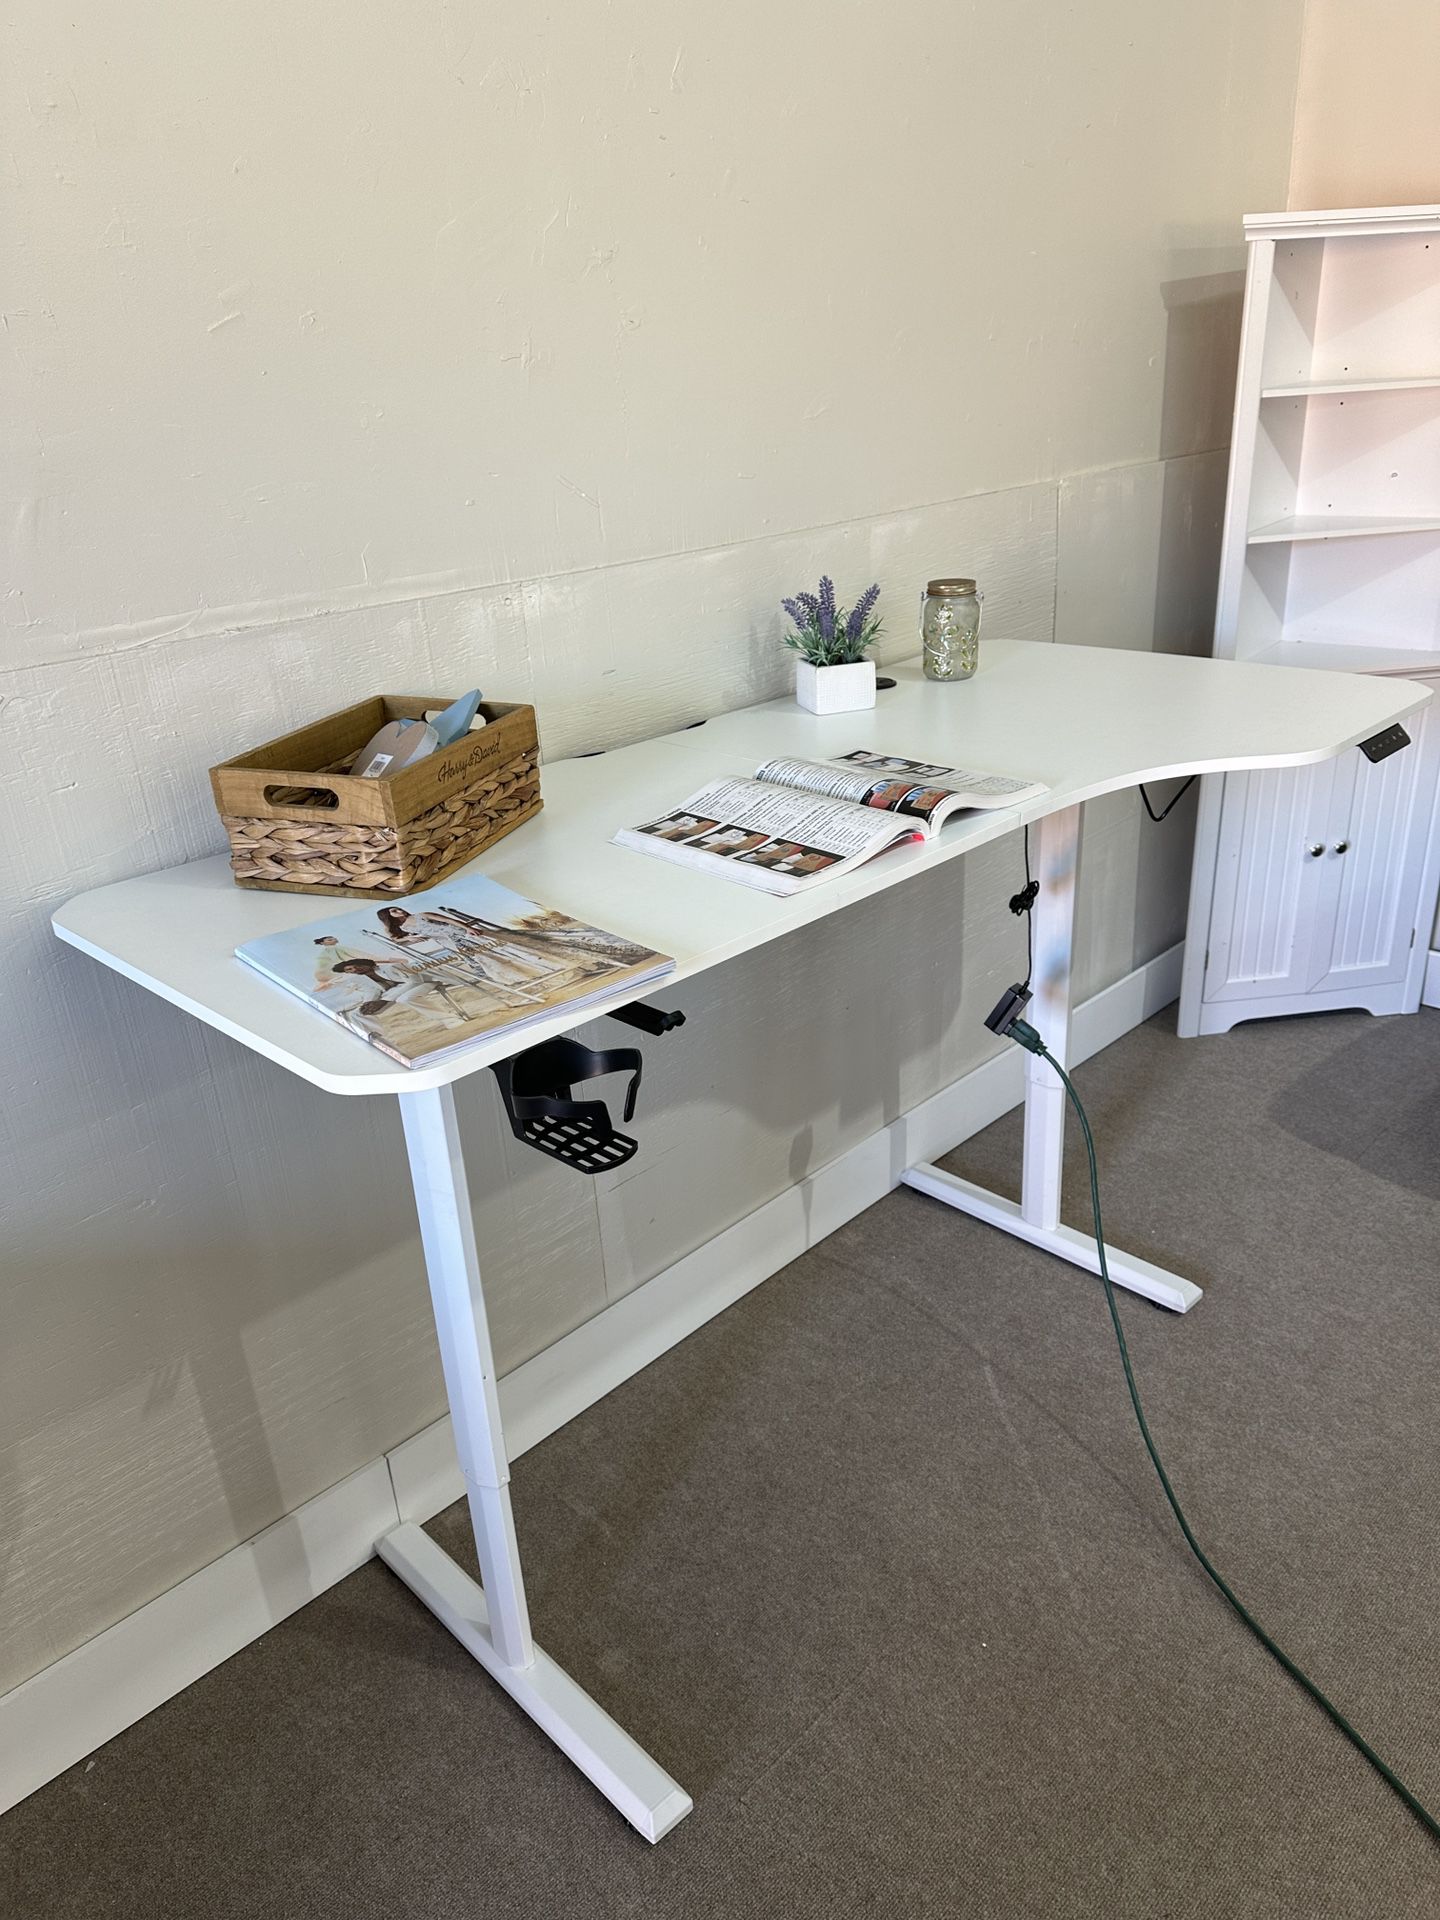 Brand new adjustable Height electric computer desk in white